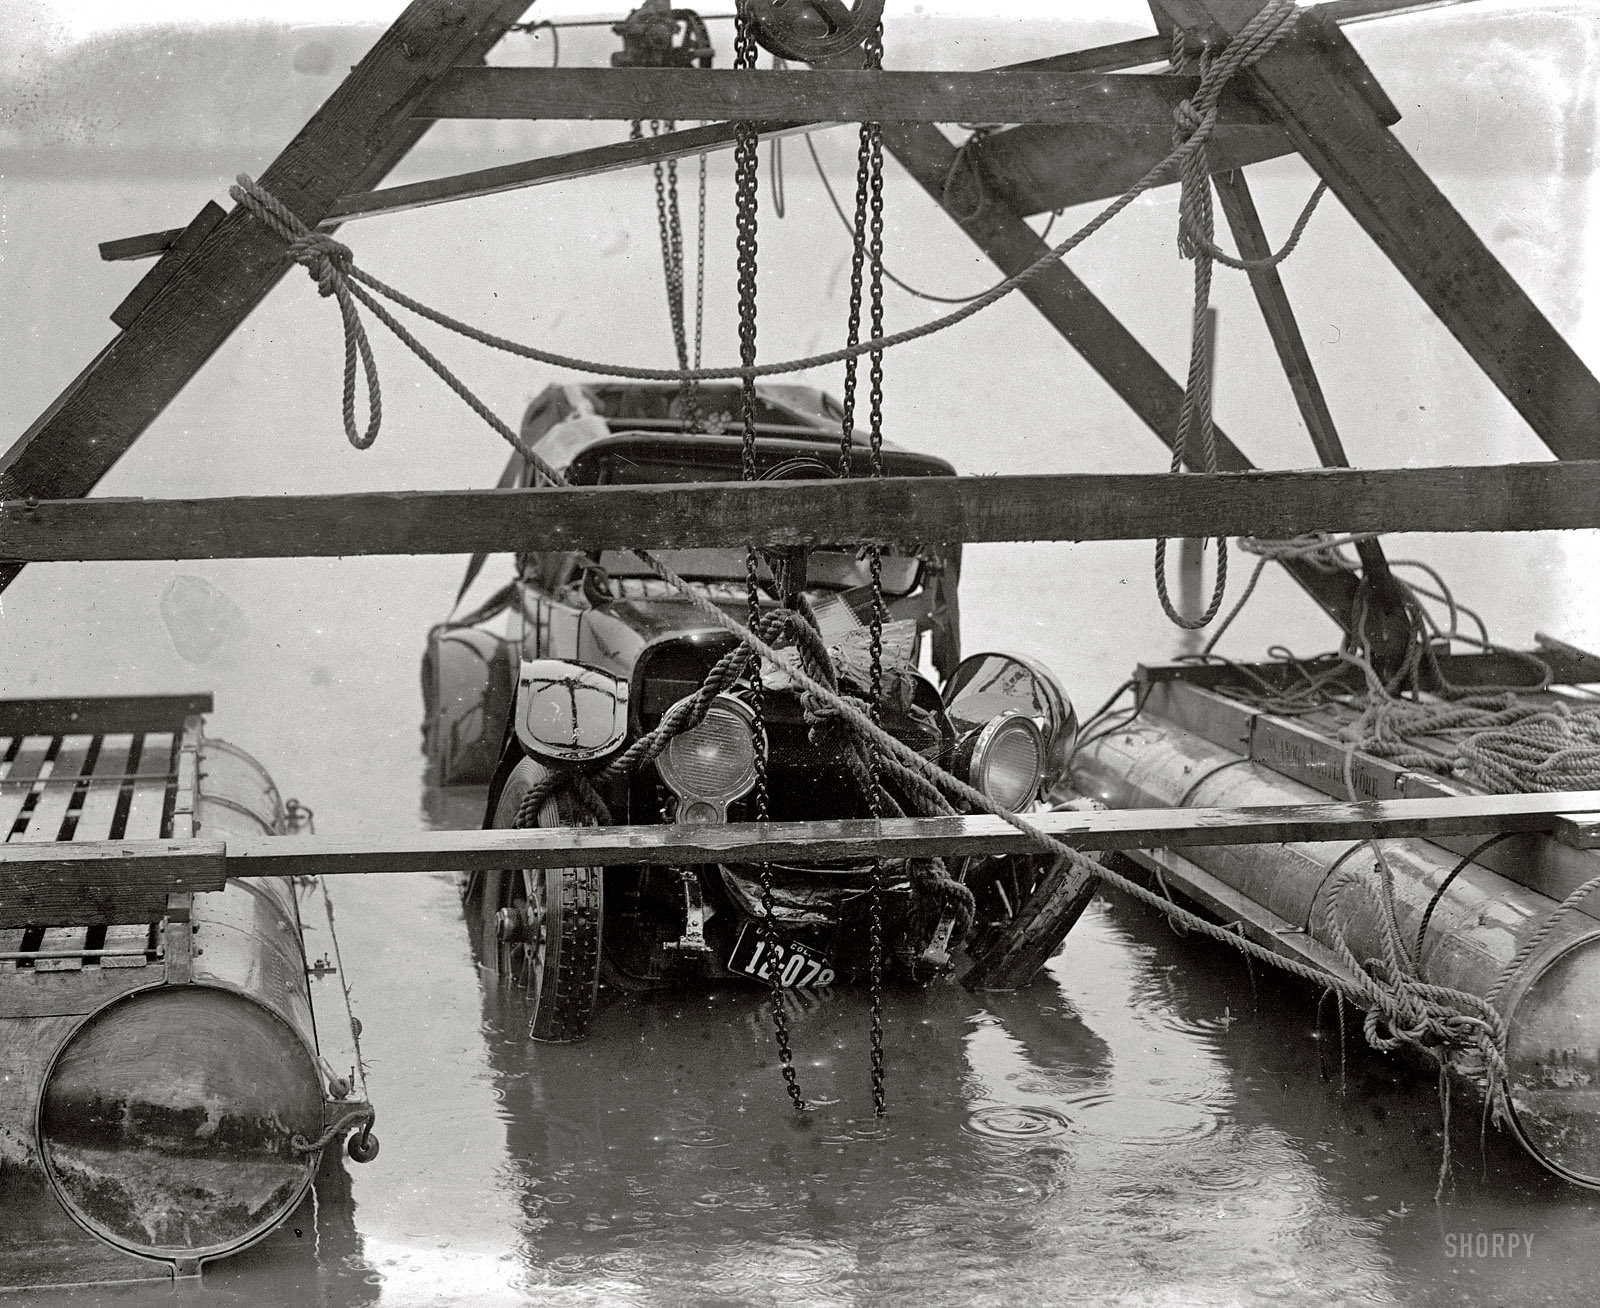 "Auto wreck. December 31, 1923." Continuing this week's theme of vehicular mishaps on (and off) the roads of Washington, D.C. On New Year's Eve, this car was in the drink. See the comments for details about this fatal accident in the Tidal Basin. National Photo Company Collection glass negative. View full size.